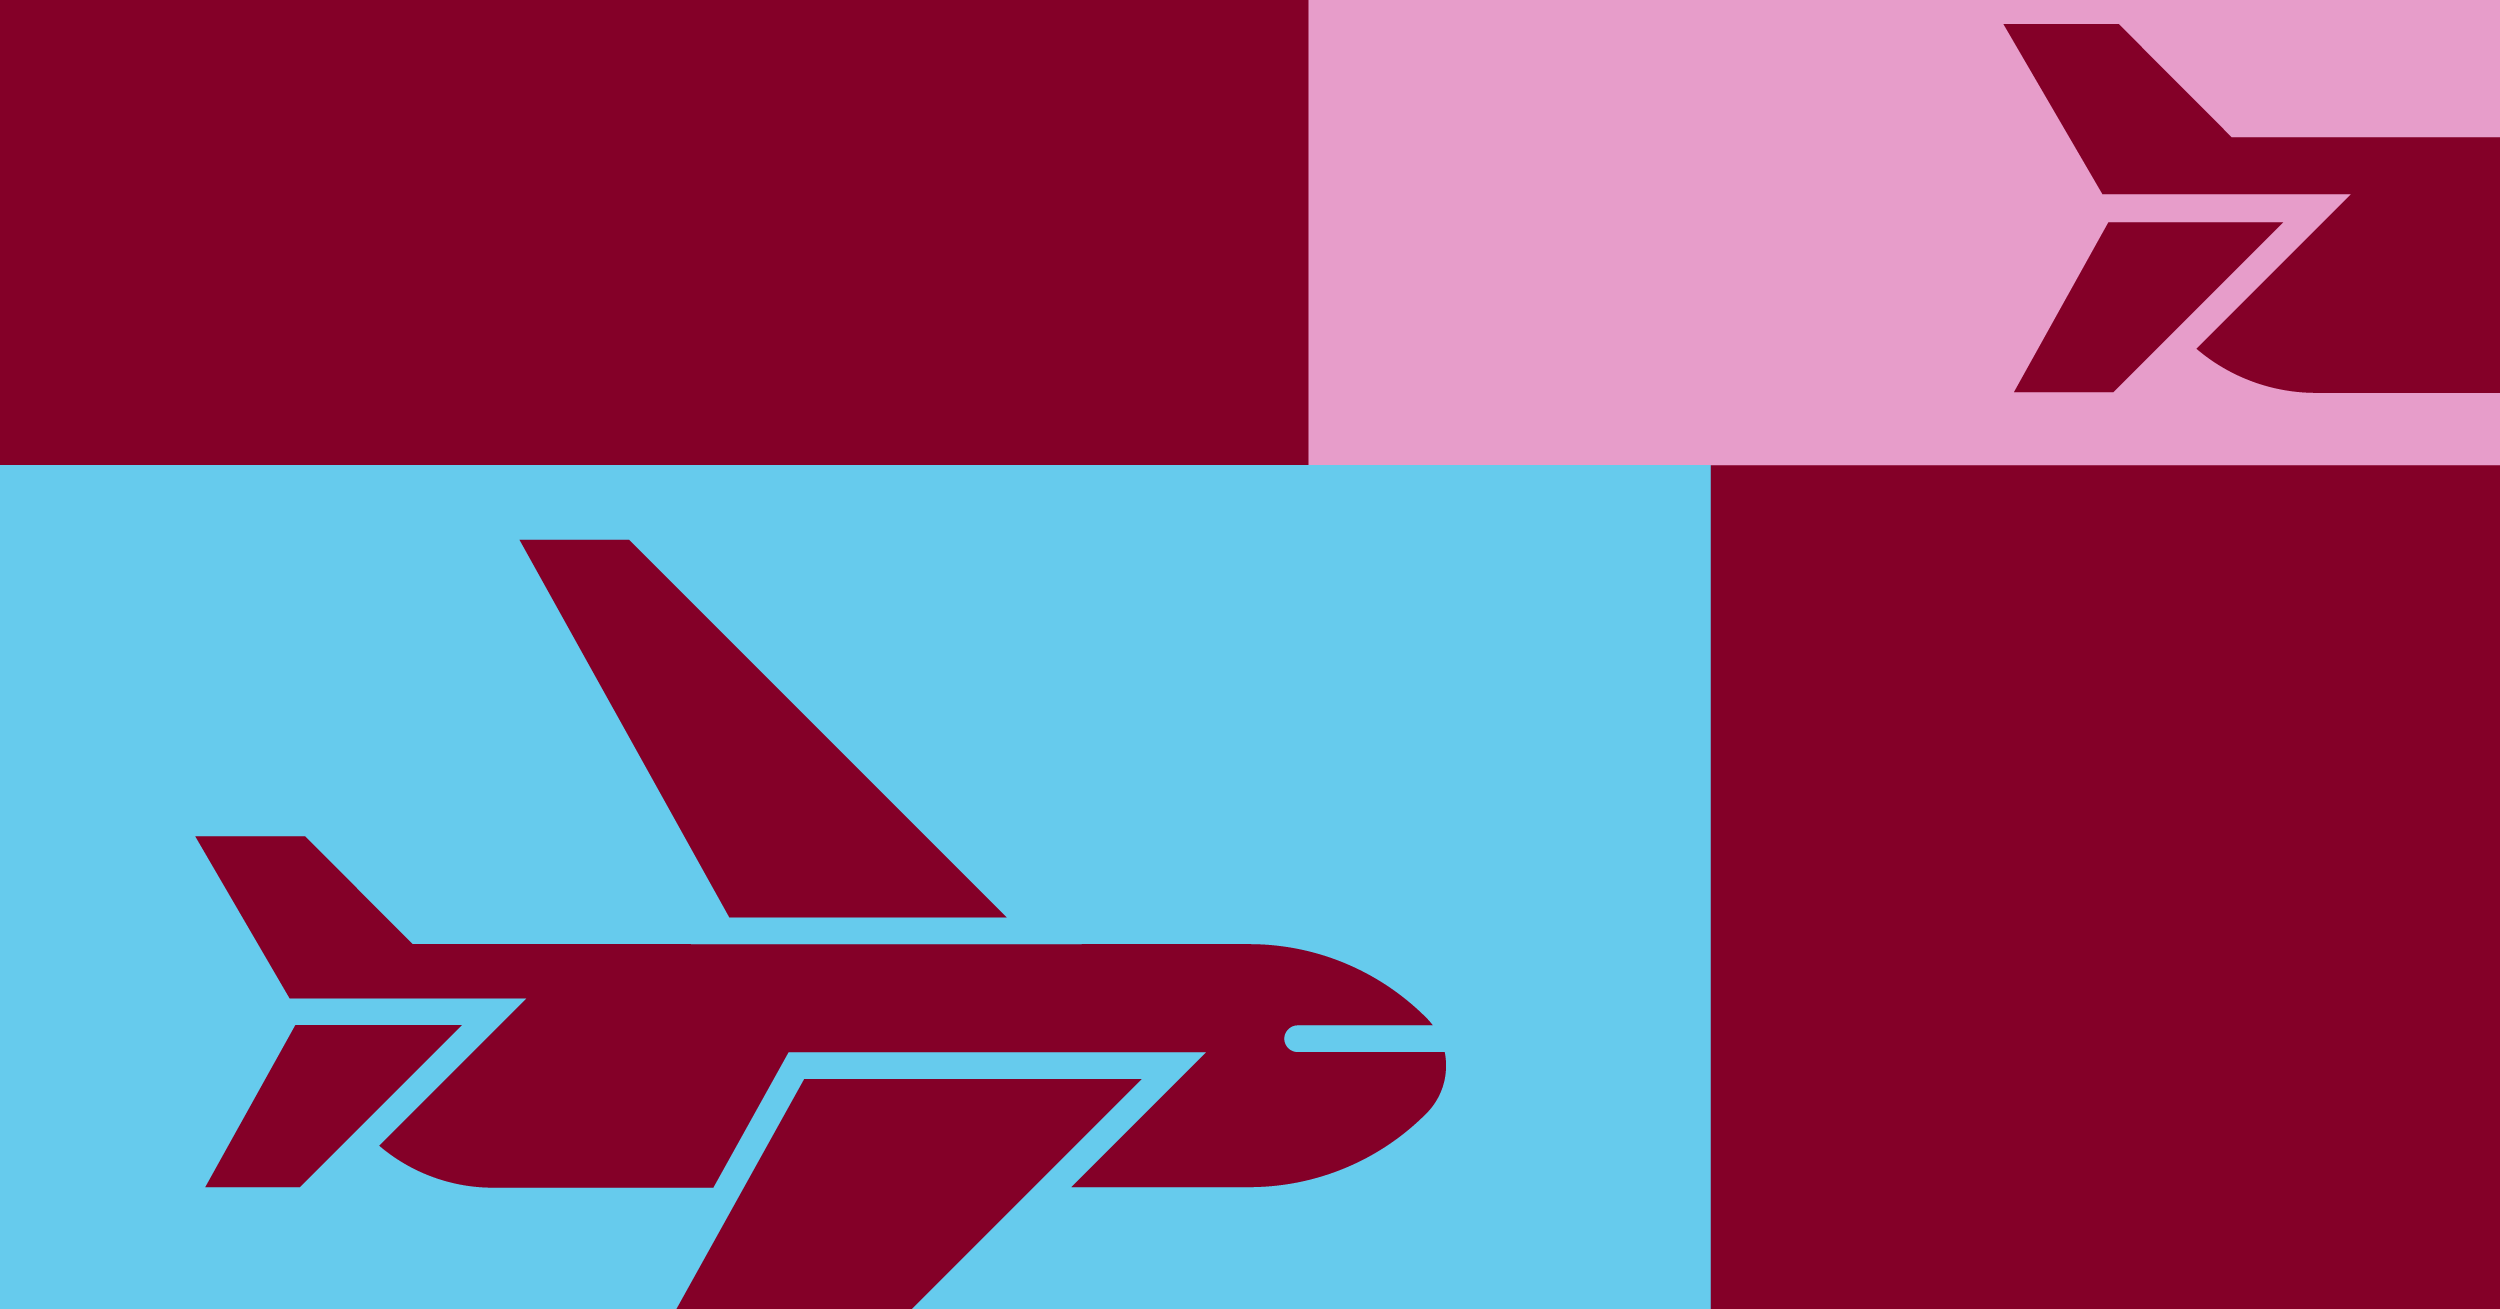 Illustration of an airplane outlined in blue and half of an airplane outline in pink in front of a red background depicting their airline industry.